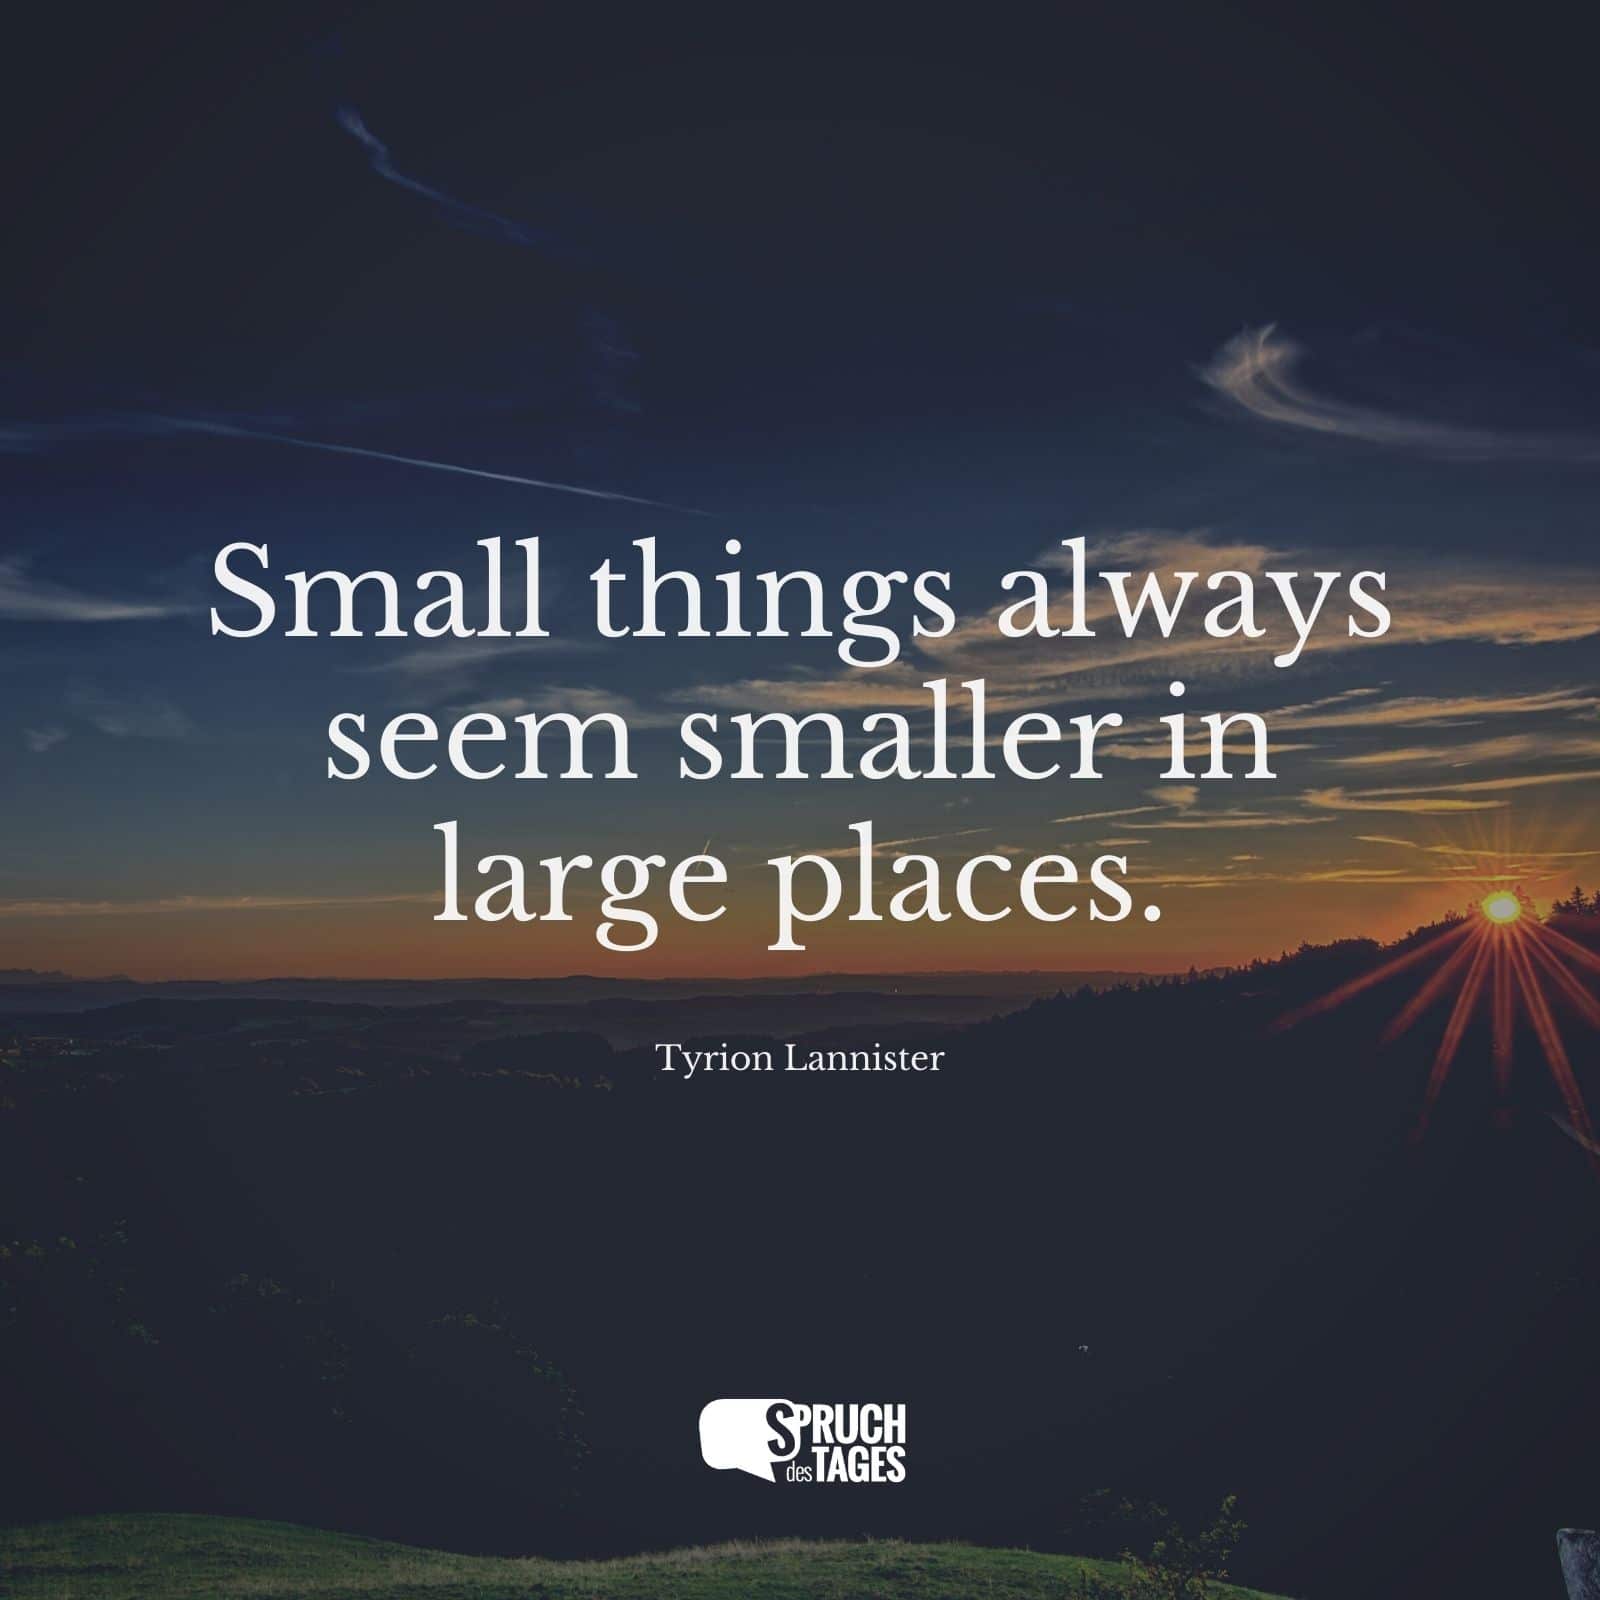 Small things always seem smaller in large places.